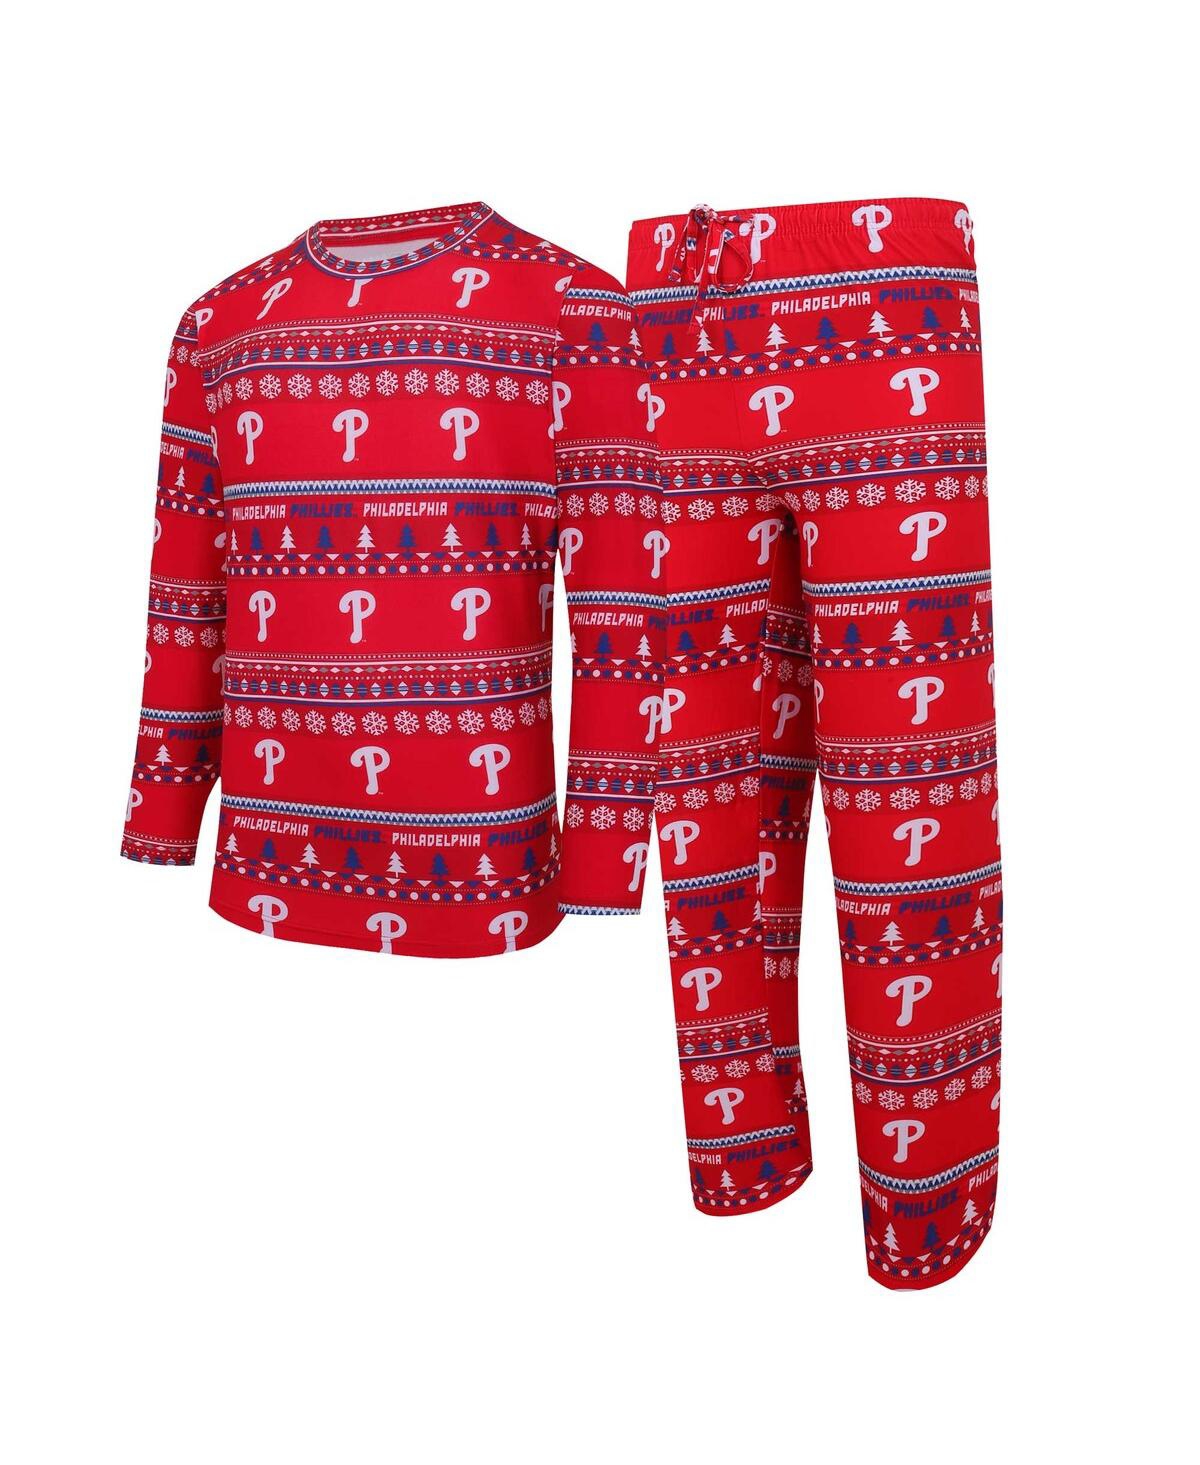 Men's Concepts Sport Red Philadelphia Phillies Knit Ugly Sweater Long Sleeve Top and Pants Set - Red